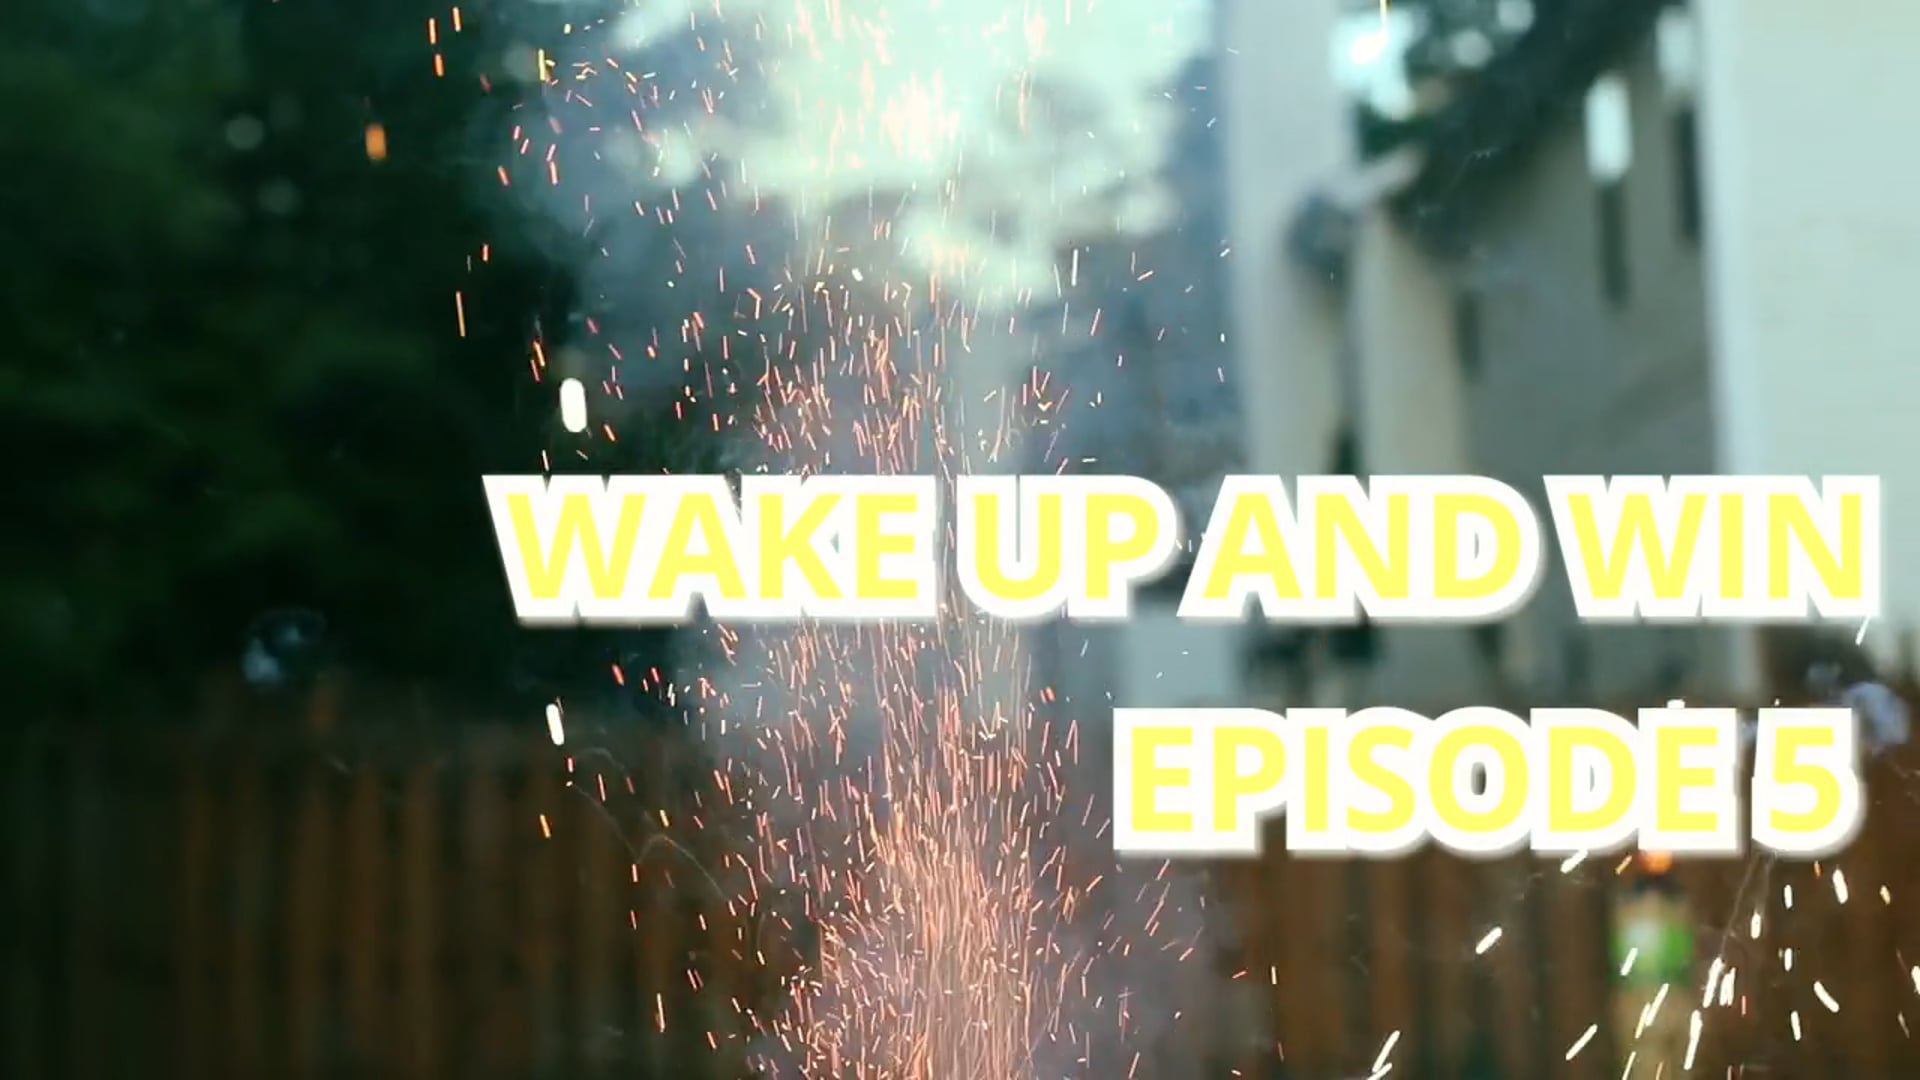 Wake Up and Win S1 E5